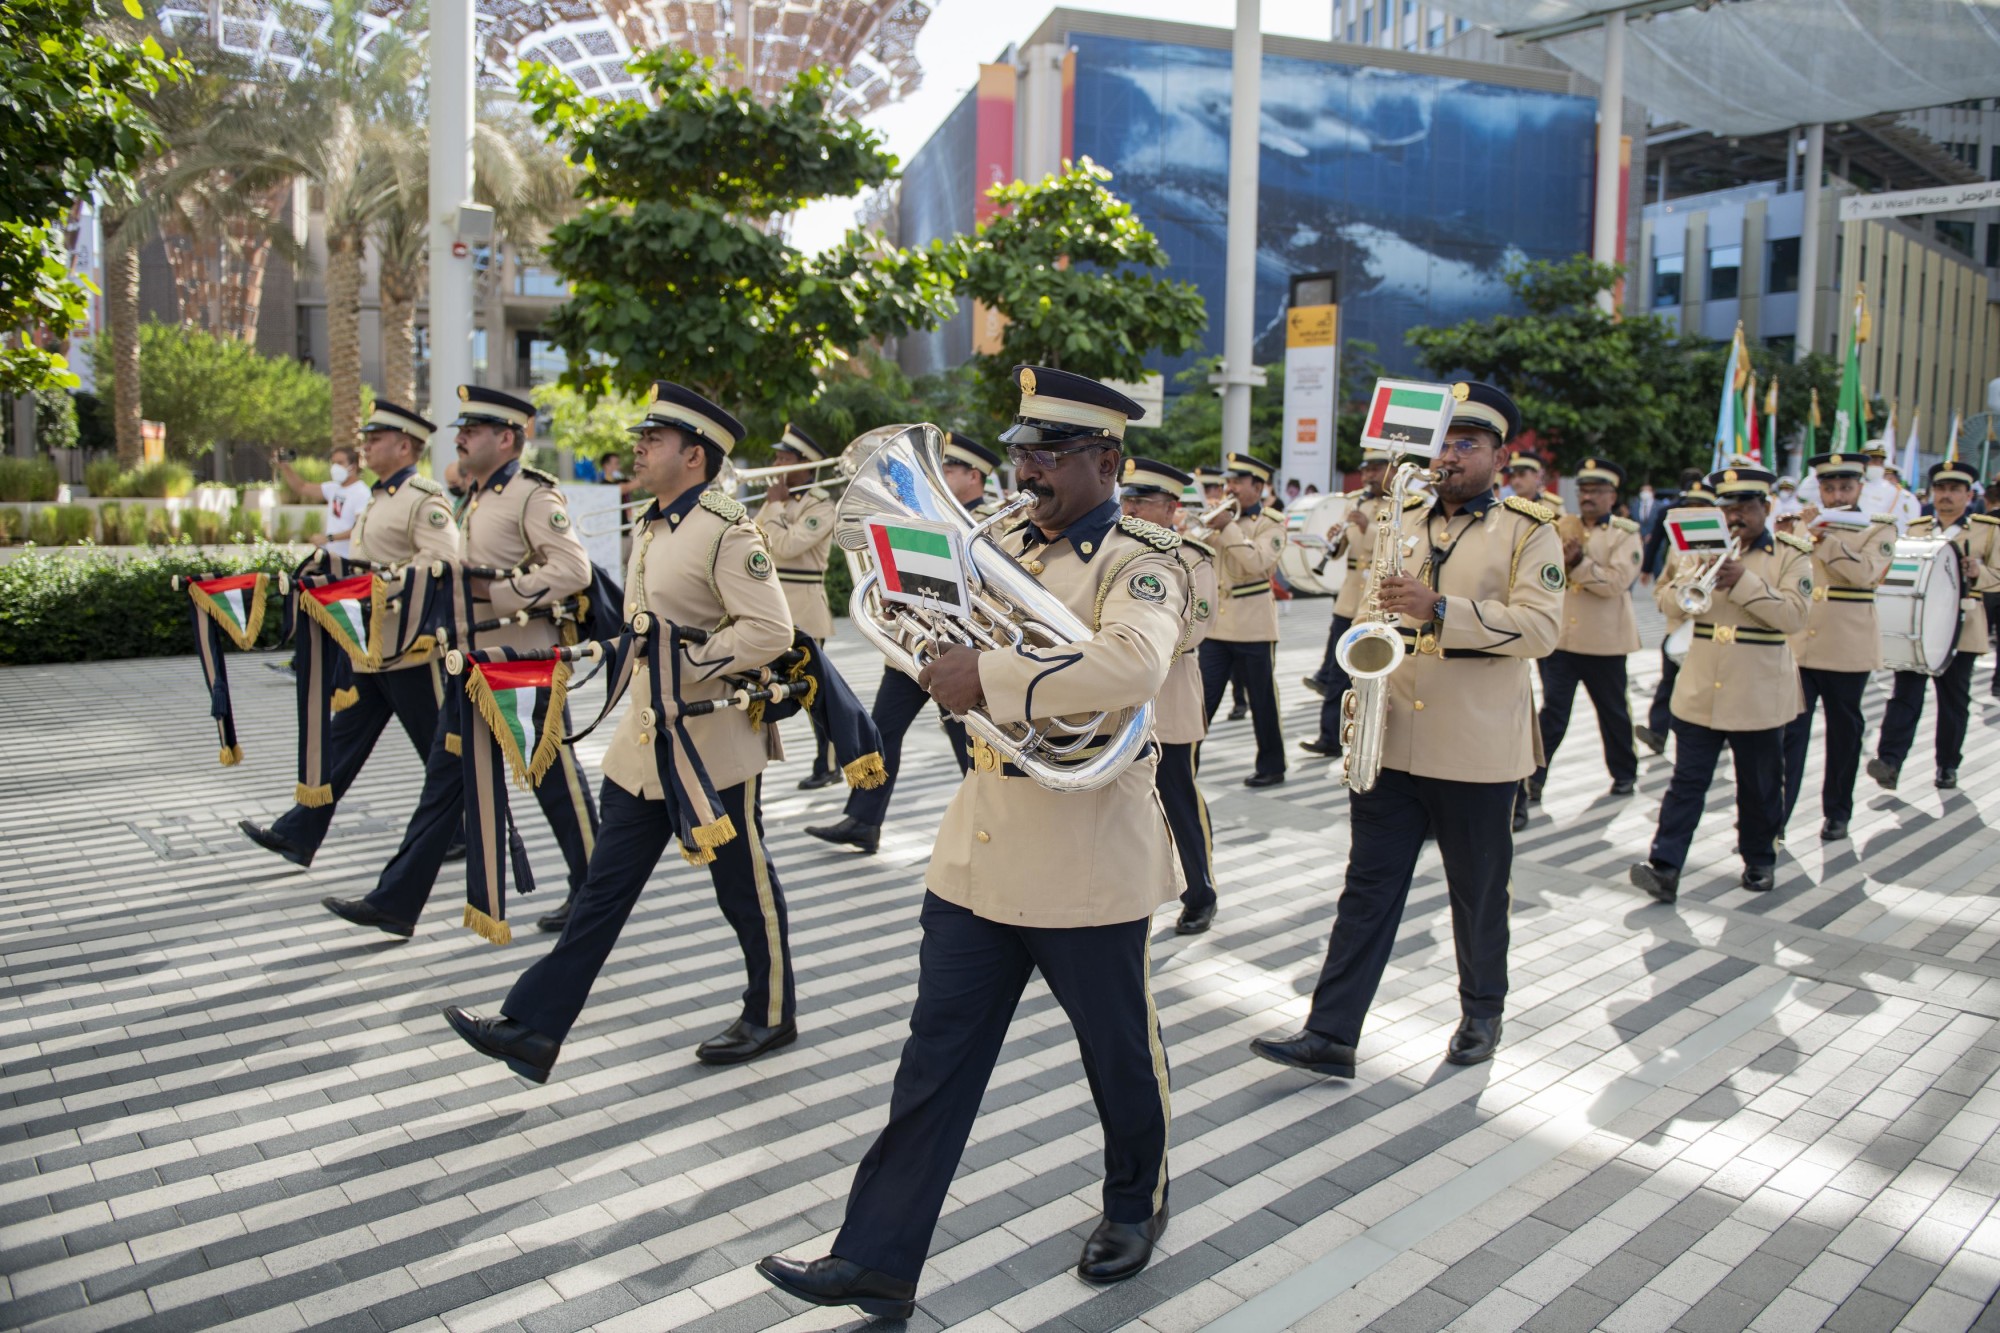 Marching band during the League of Arab States Honour Day on Sunrise Avenue - Opportunity District m25290